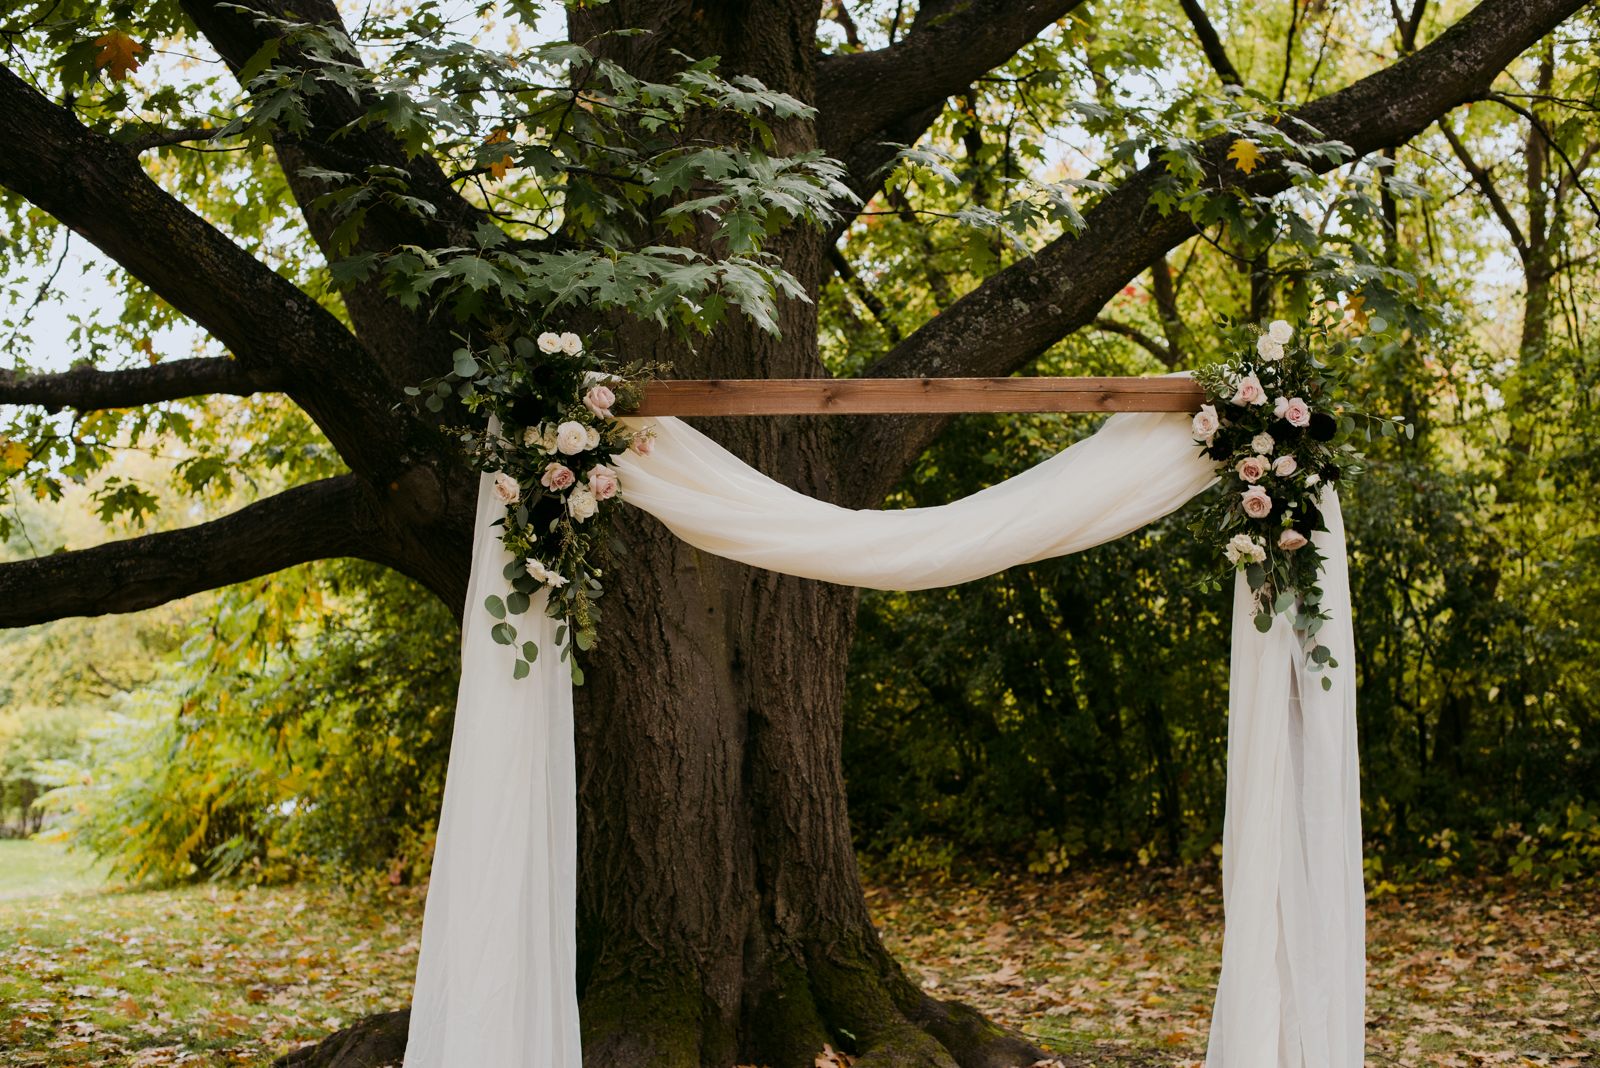 wooden wedding arch with flowers and drapery at outdoor wedding ceremony